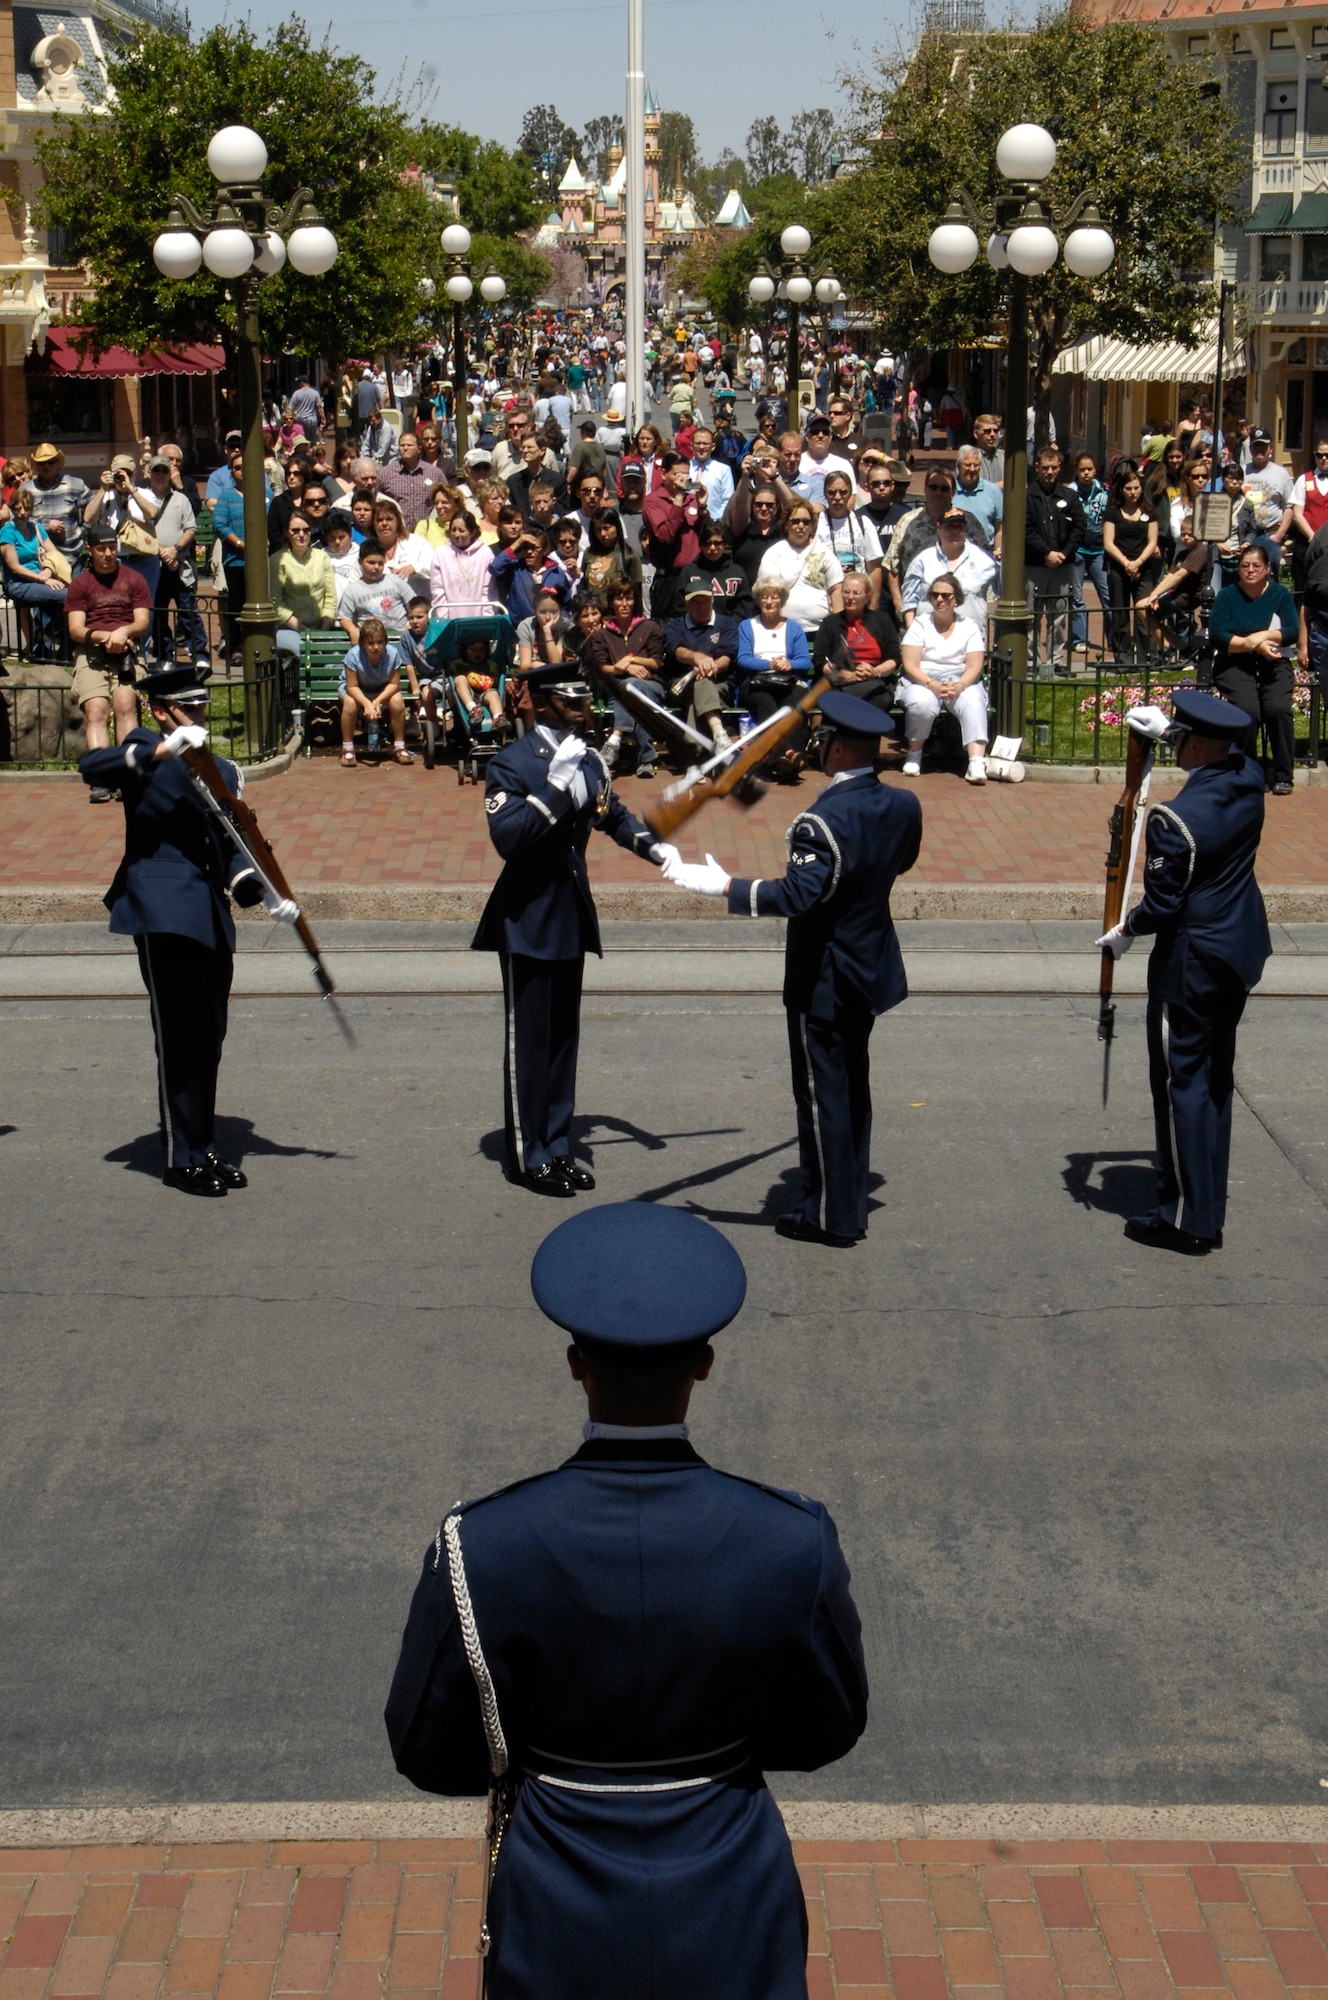 The Air Force Honor Guard Drill Team performs their 16 Man drill routine at Disneyland Resort in Aneheim, Calif., 18 April 2007. The Drill Team is the traveling component of the Air Force Honor Guard and tours Air Force bases world wide showcasing the precision of today's Air Force to recruit, retain, and inspire Airmen for the Air Force mission.